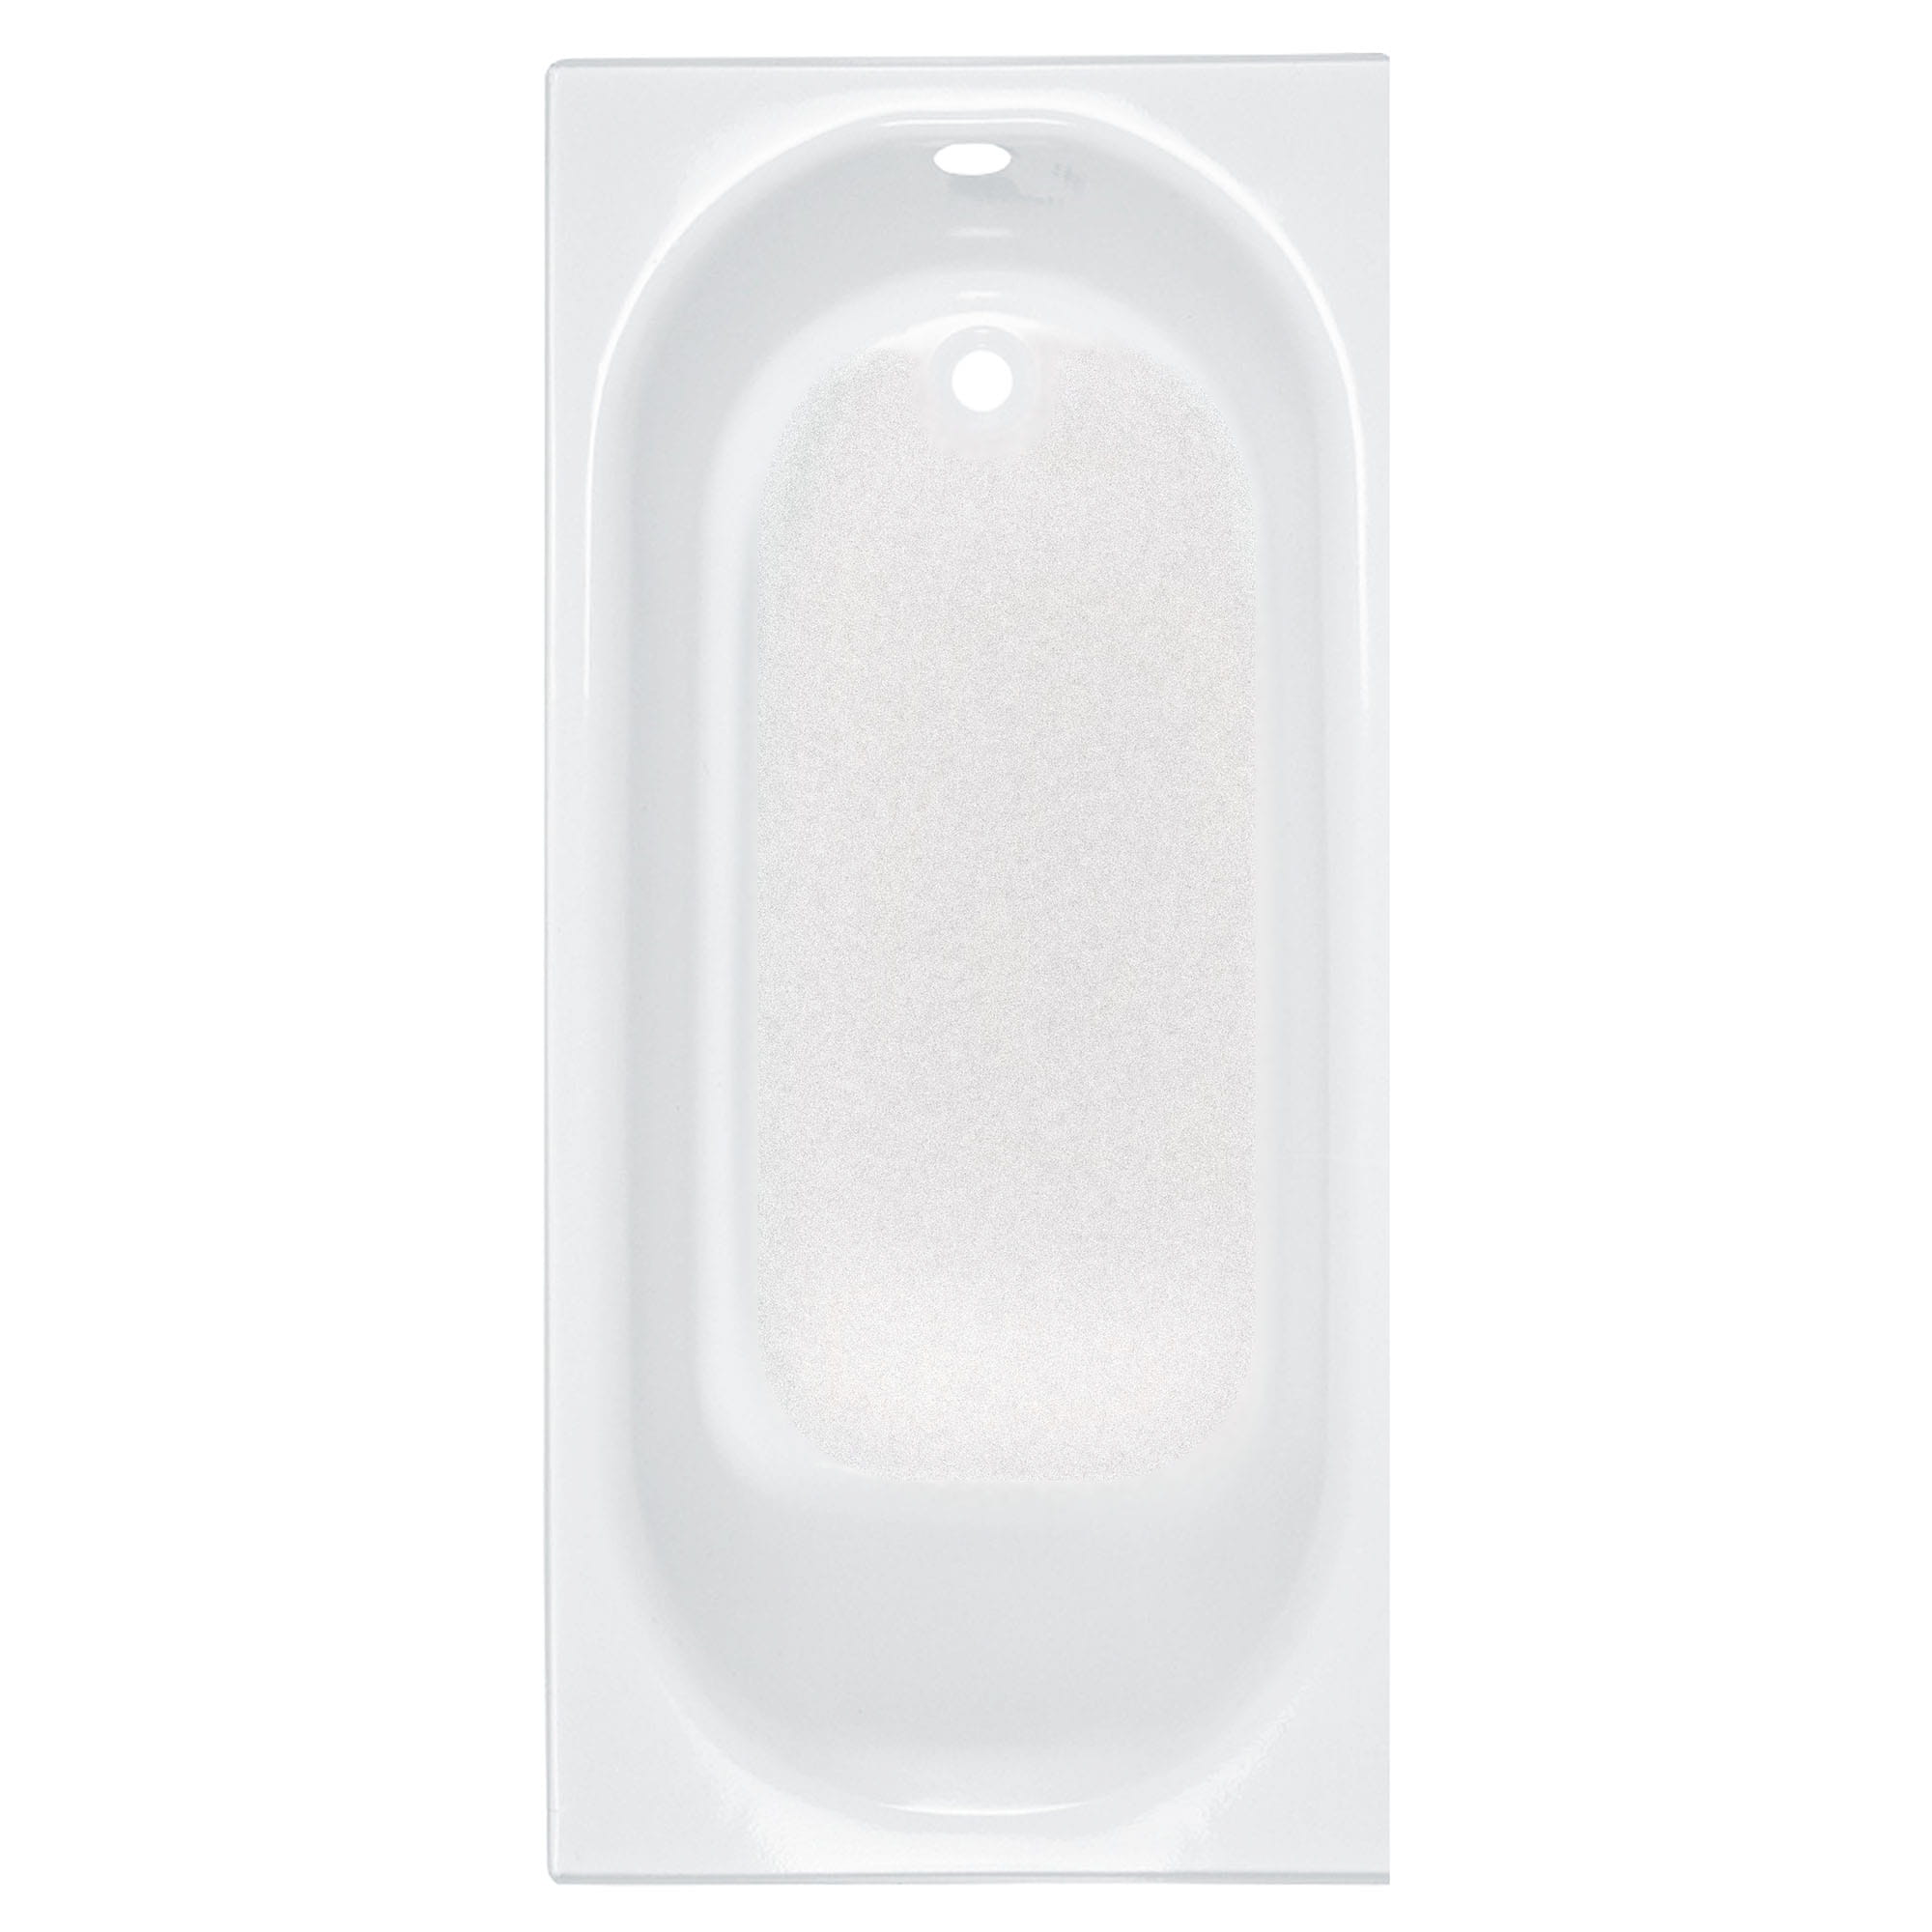 Princeton Americast 60 x 30 Inch Integral Apron Bathtub Above Floor Rough with Left Hand Outlet ARCTIC